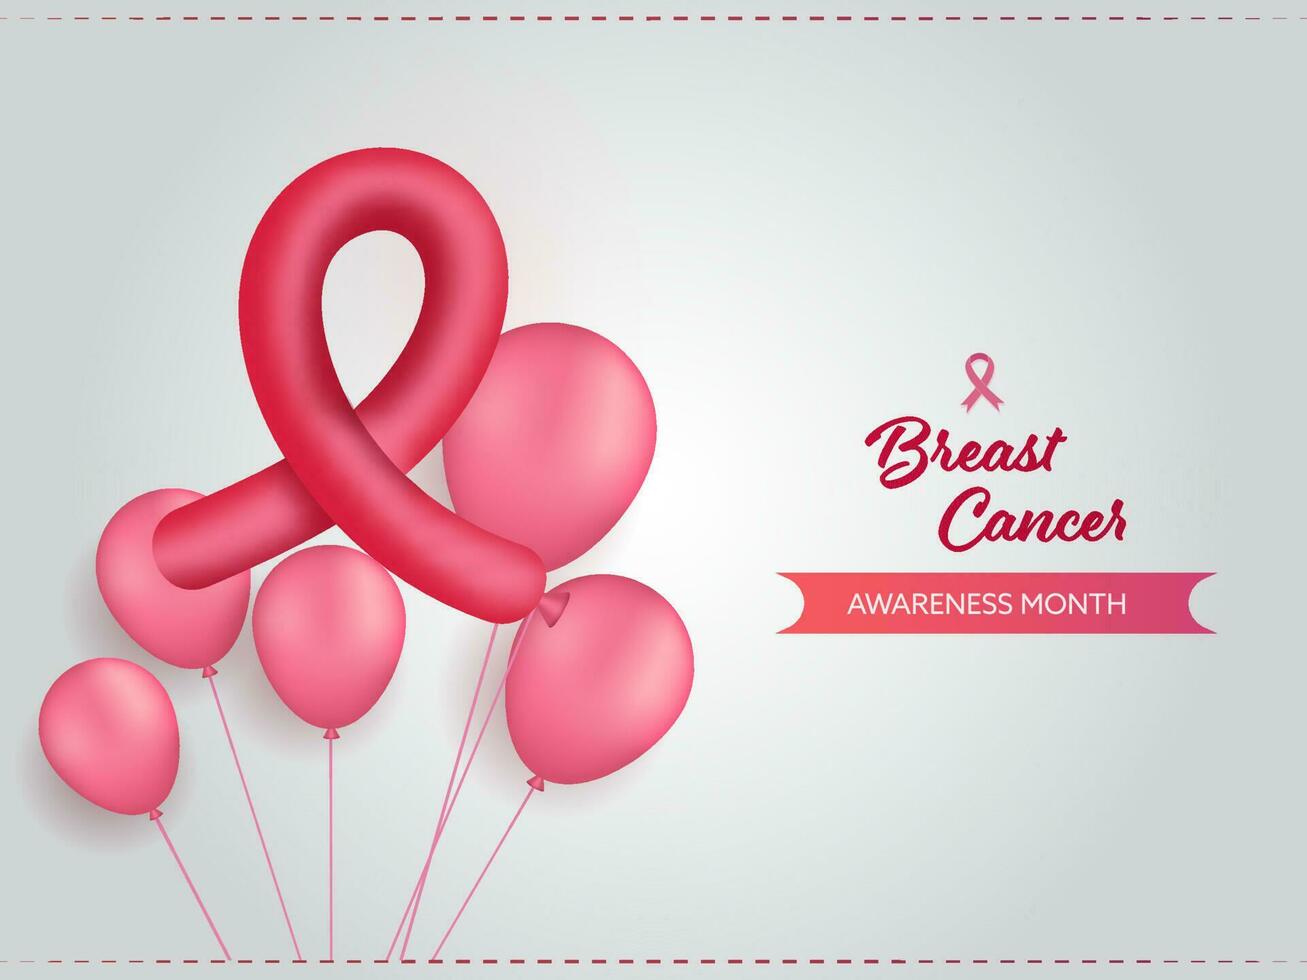 Breast Cancer Awareness Month Concept with Pink Symbol with Balloons. Healthcare concept. vector